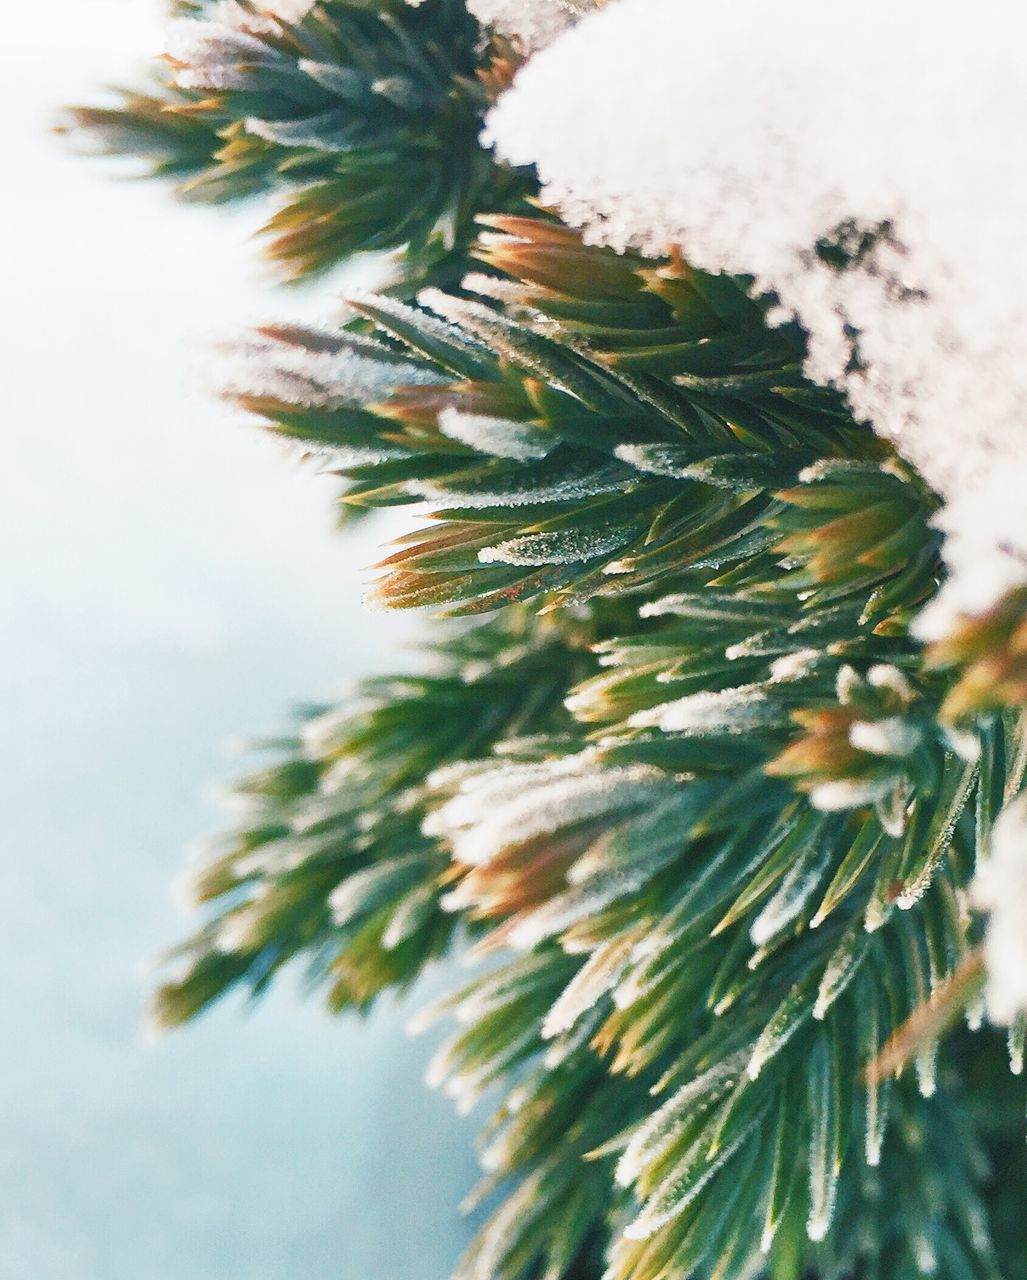 plant, tree, pine tree, cold temperature, snow, winter, growth, nature, close-up, needle - plant part, branch, focus on foreground, beauty in nature, coniferous tree, no people, day, fir tree, selective focus, frozen, outdoors